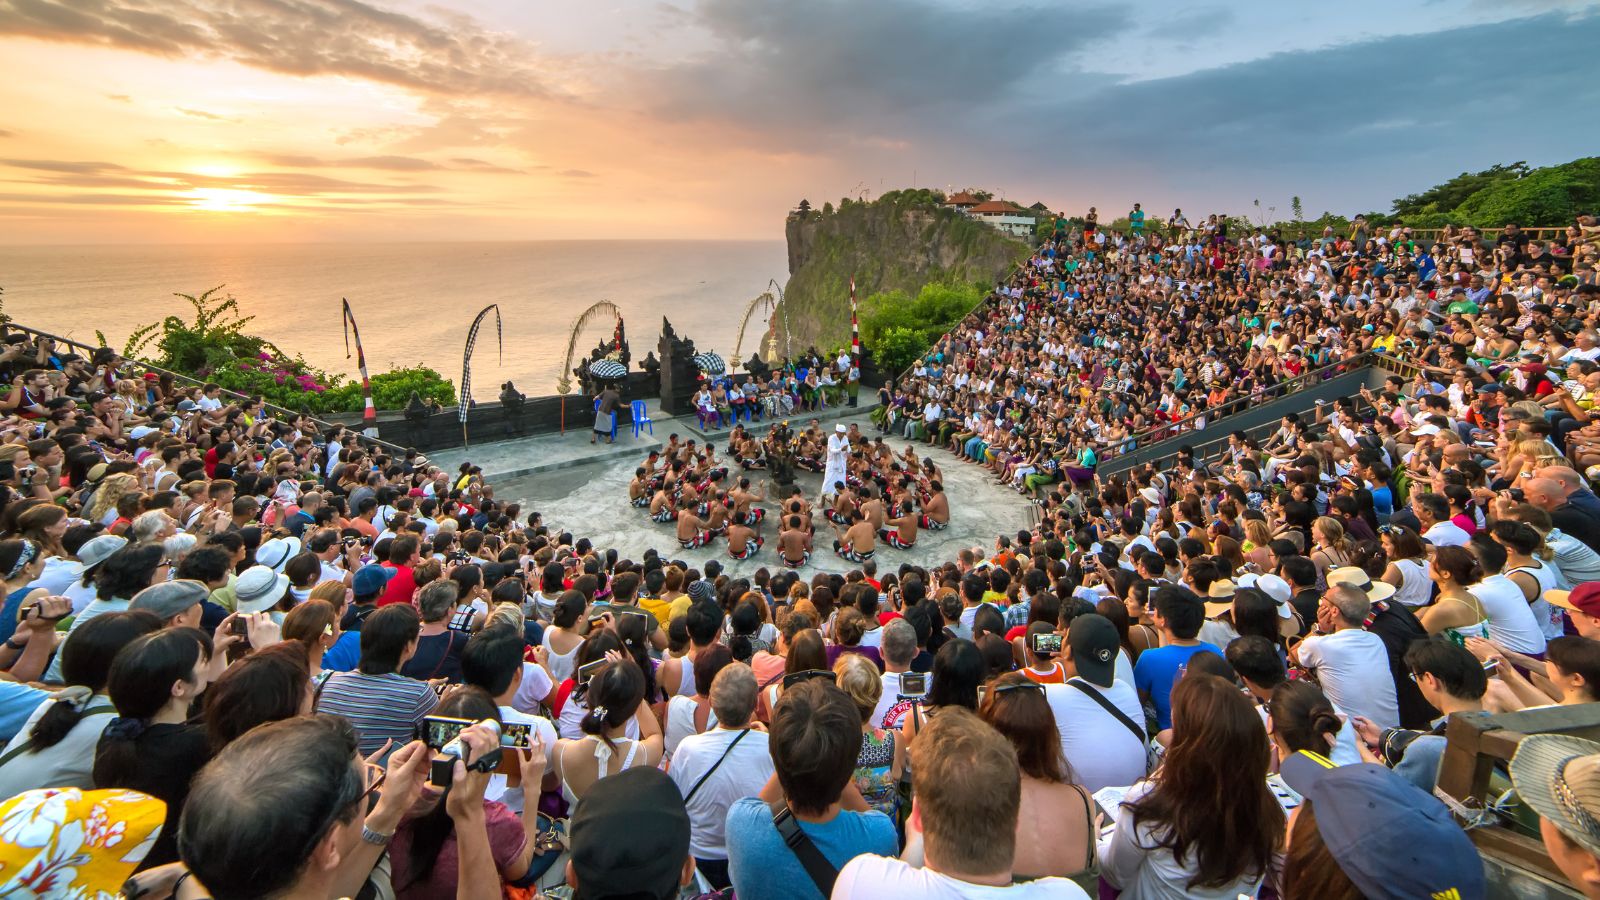 Bali Welcomed 2.1 Million Tourists in 2022, According To Officials